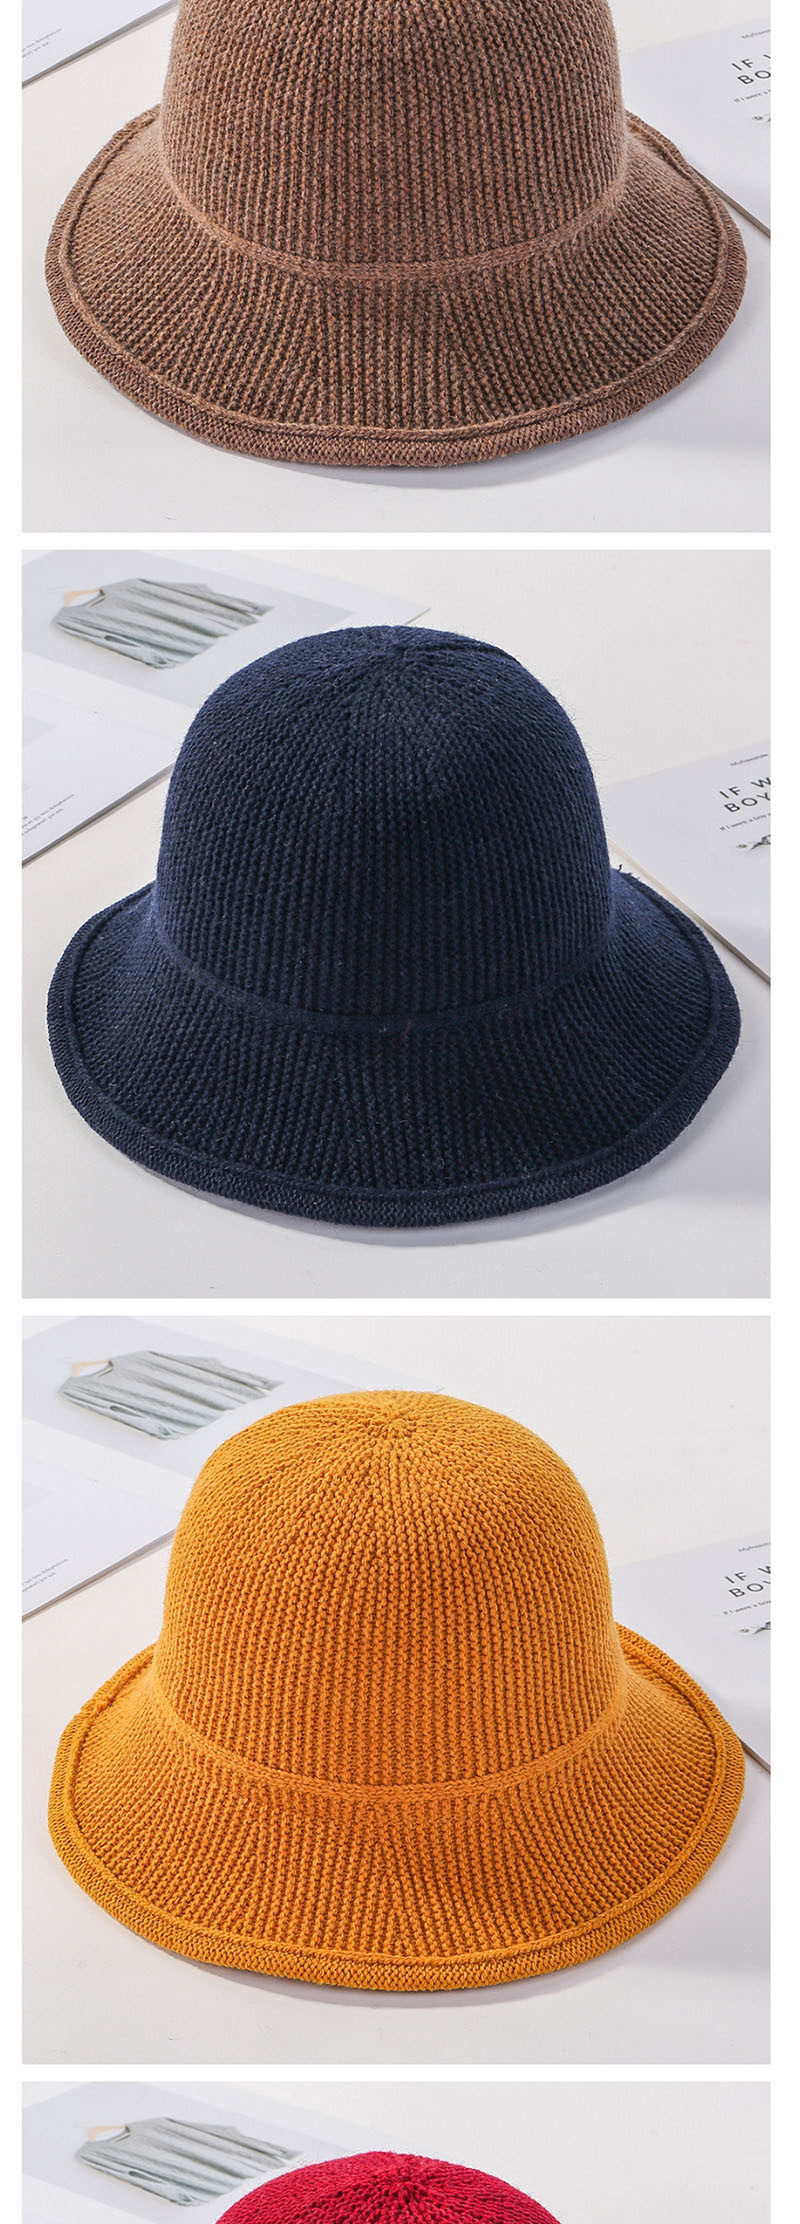 Fashion Black Knitted Wool Fisherman Hat,Beanies&Others